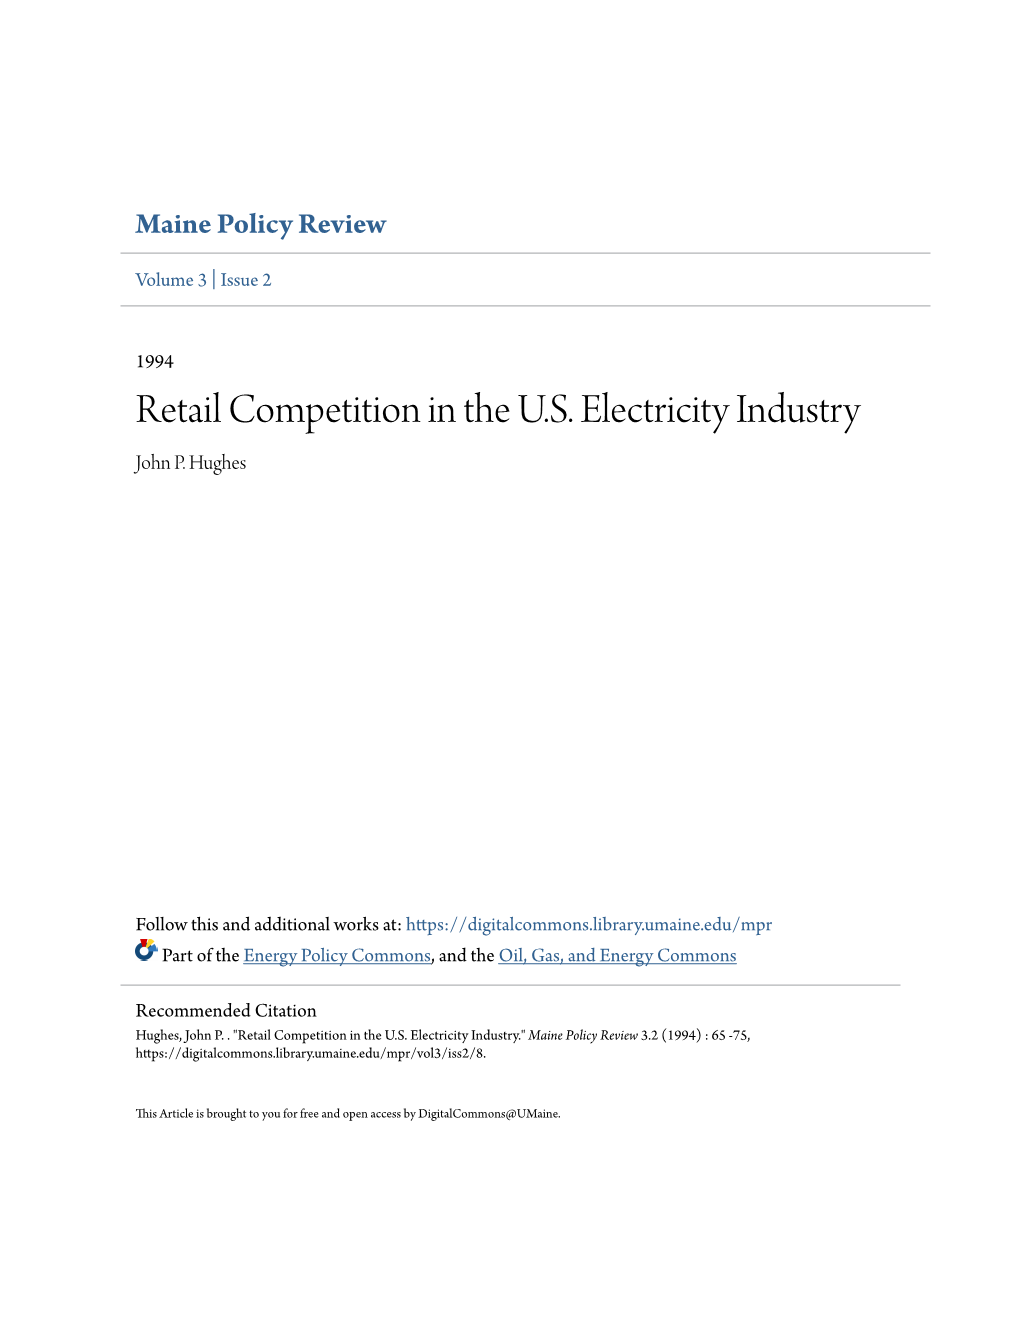 Retail Competition in the U.S. Electricity Industry John P